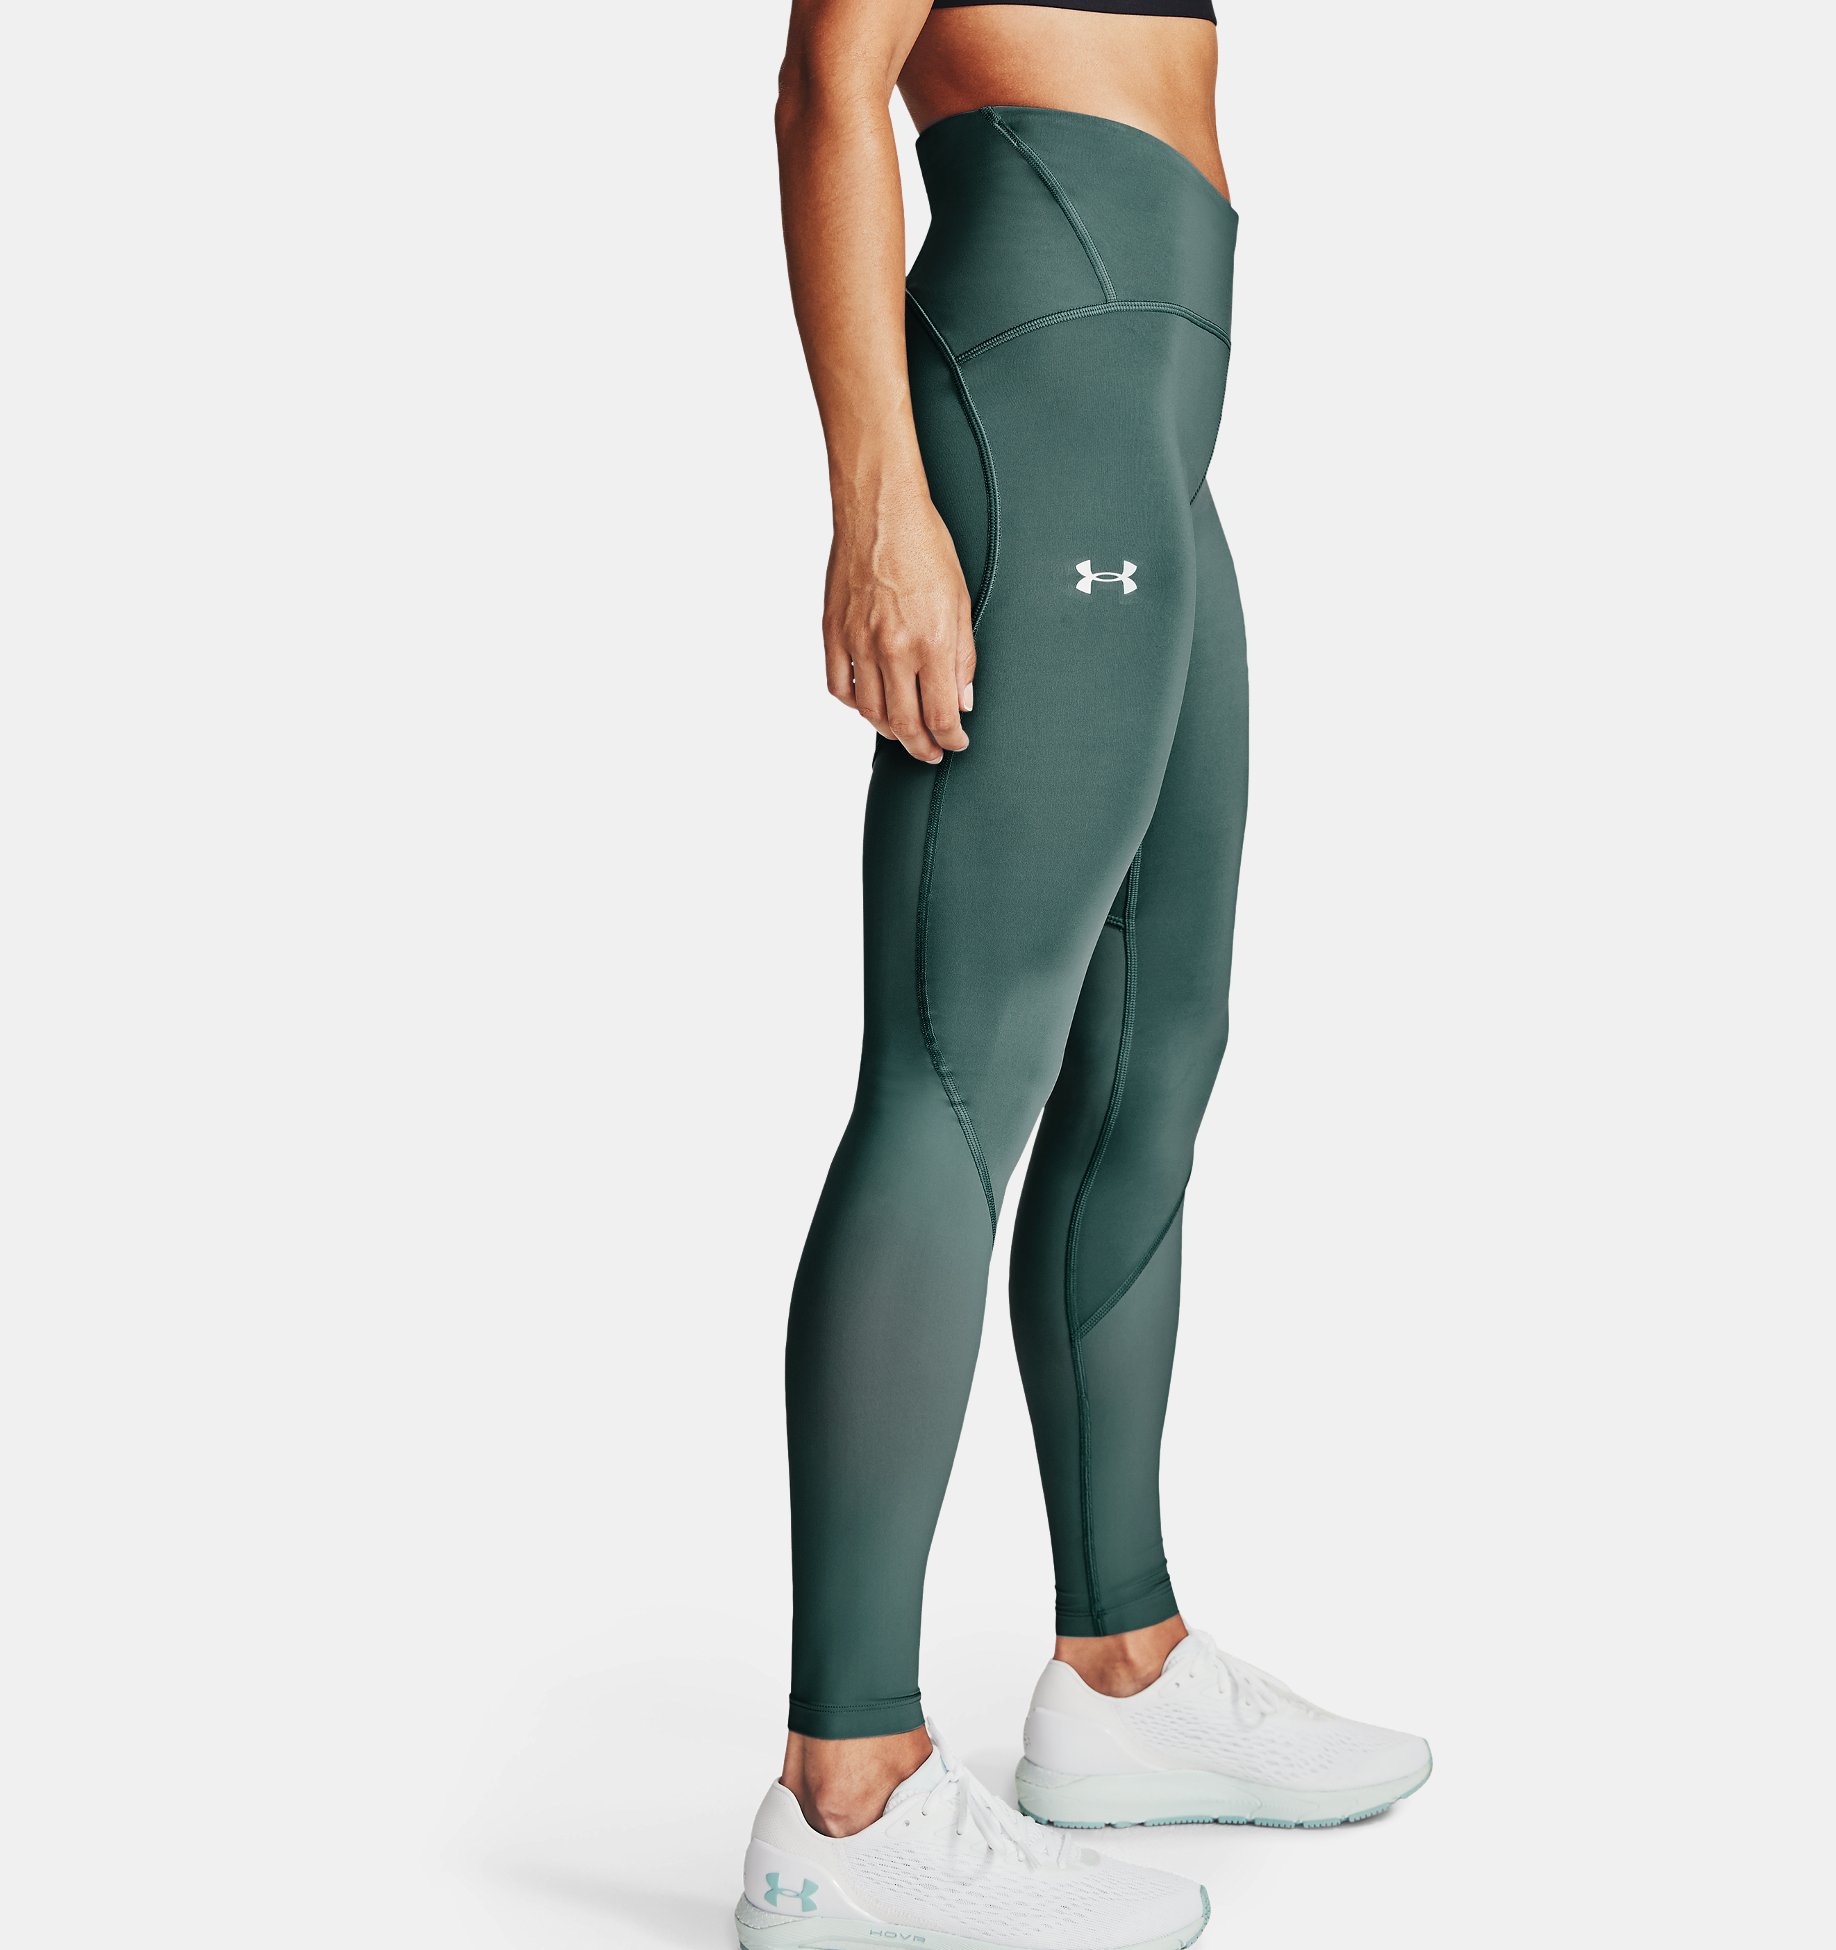 AW20 Visita lo Store di Under ArmourUnder Armour Fly Fast HeatGear Tights S 